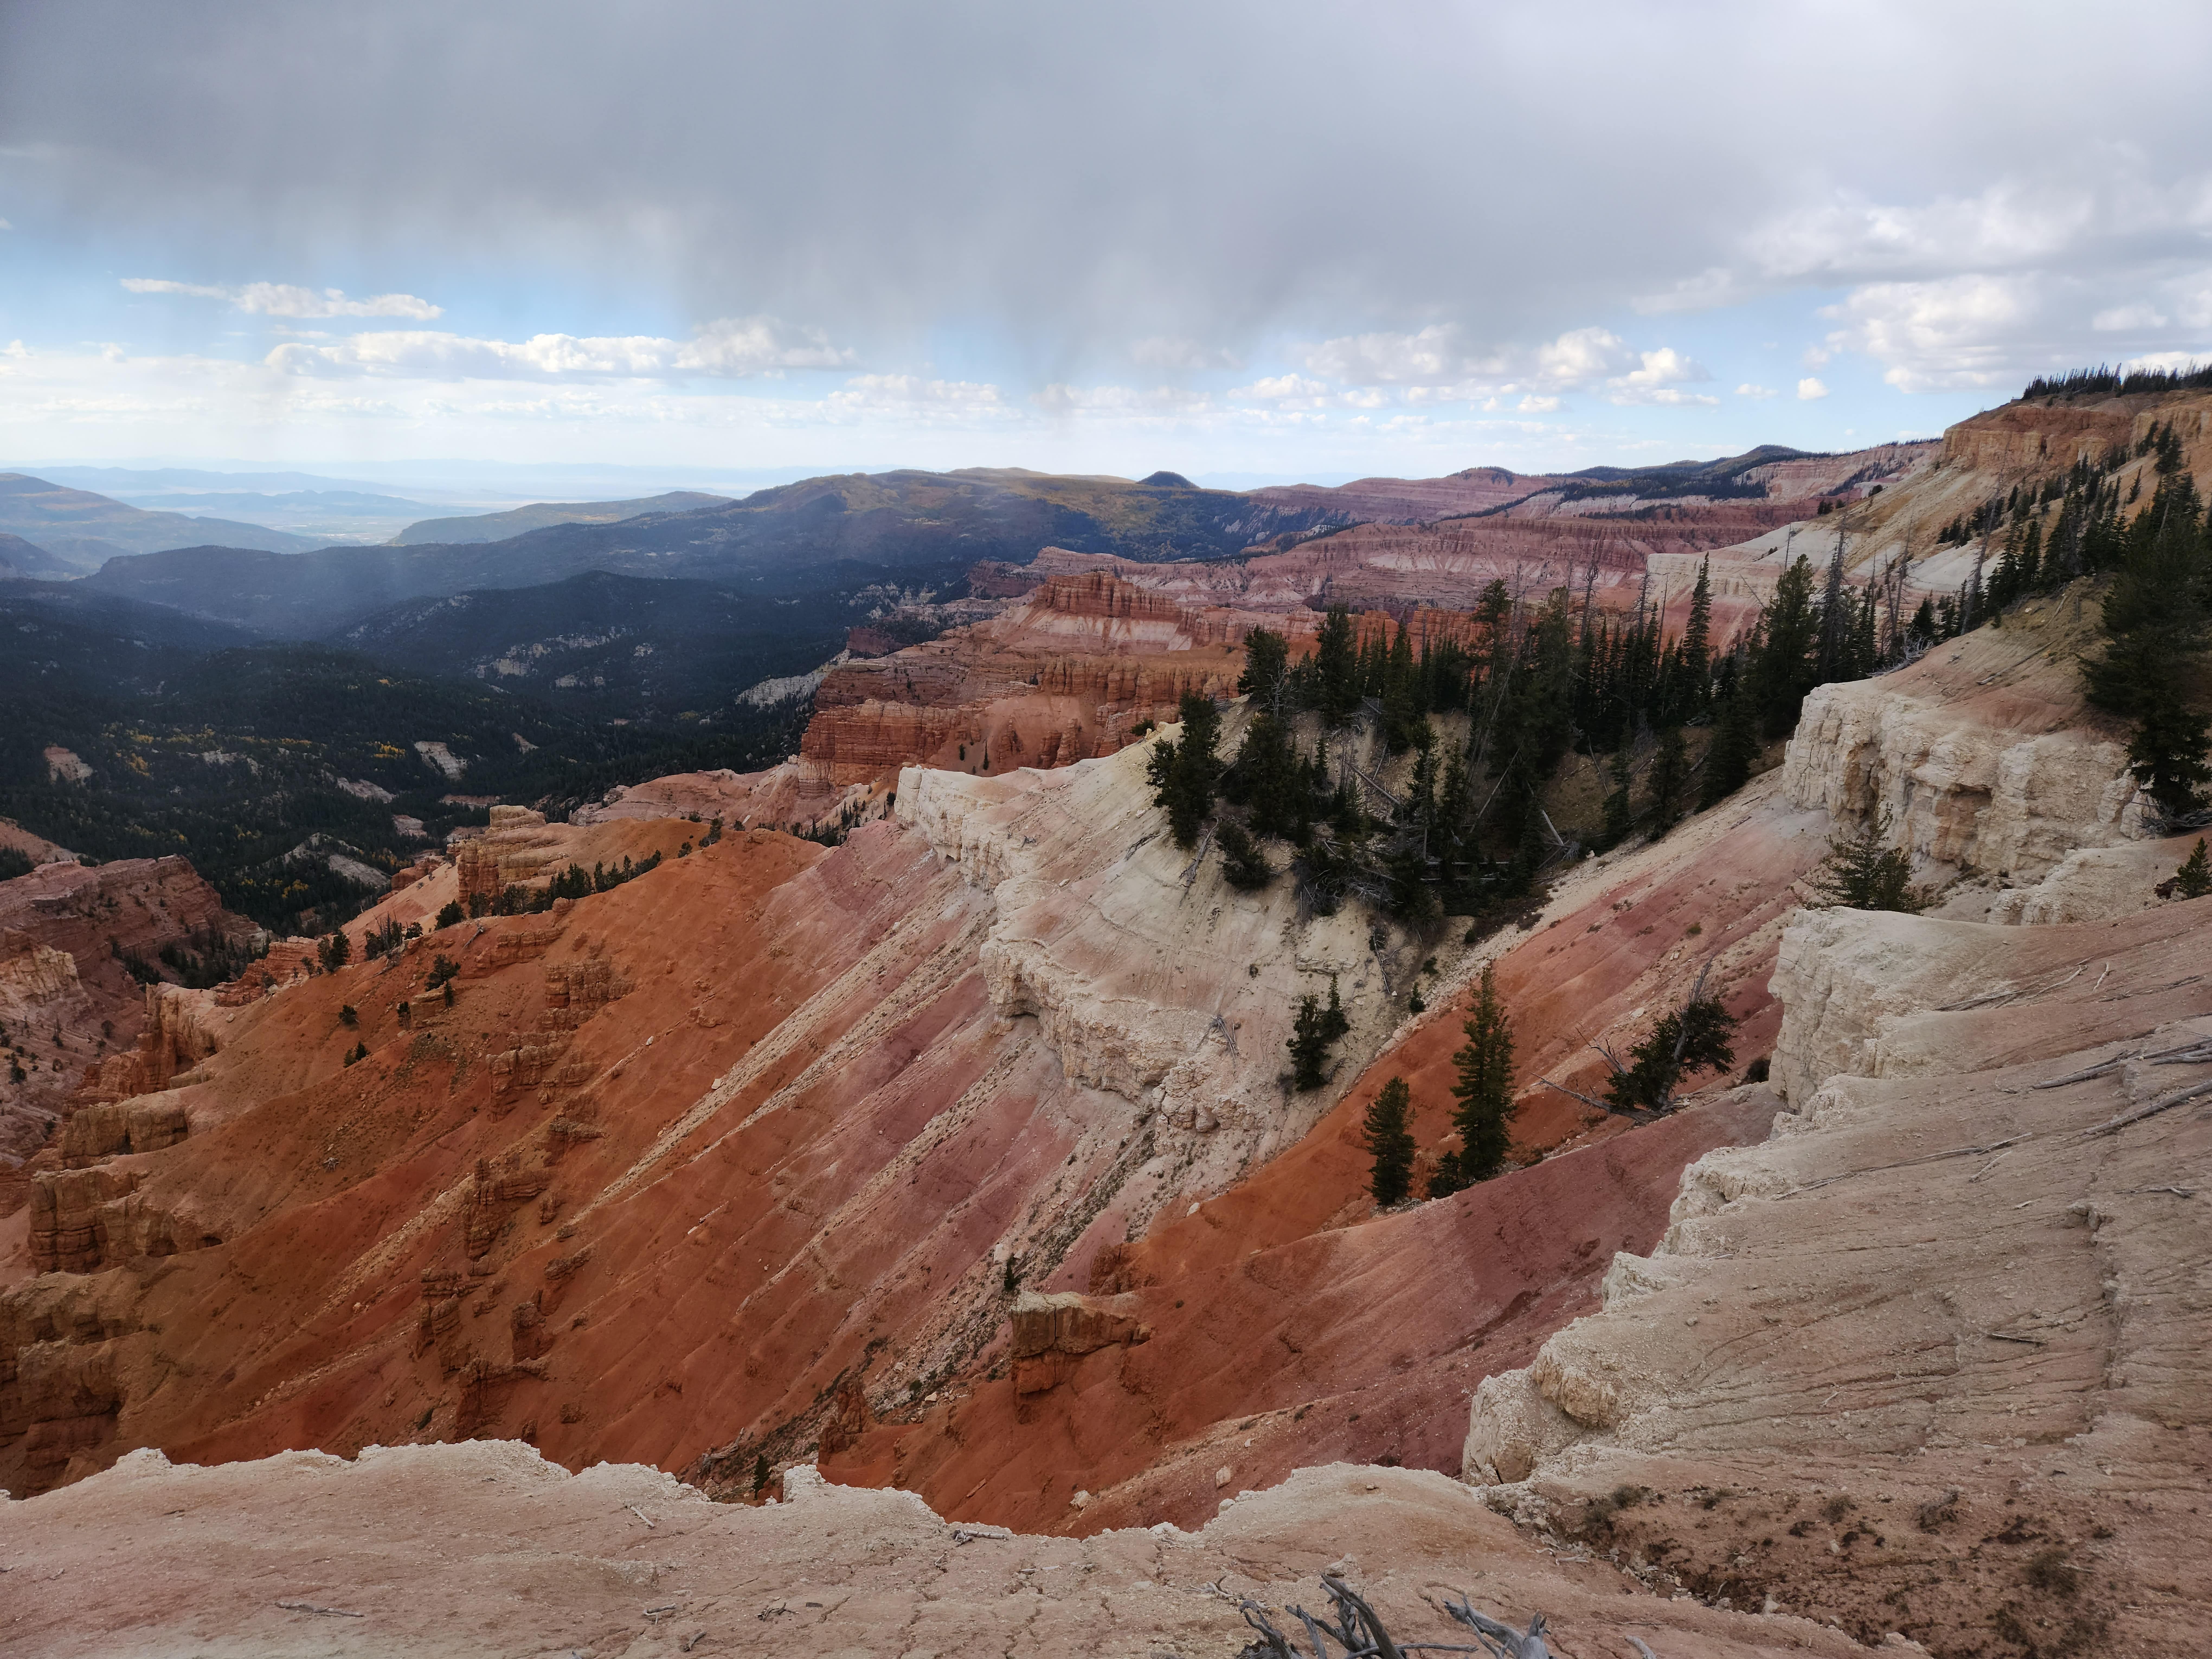 Cedar Breaks National Monument- an ampitheater of red rocks in the southern Utah mountains